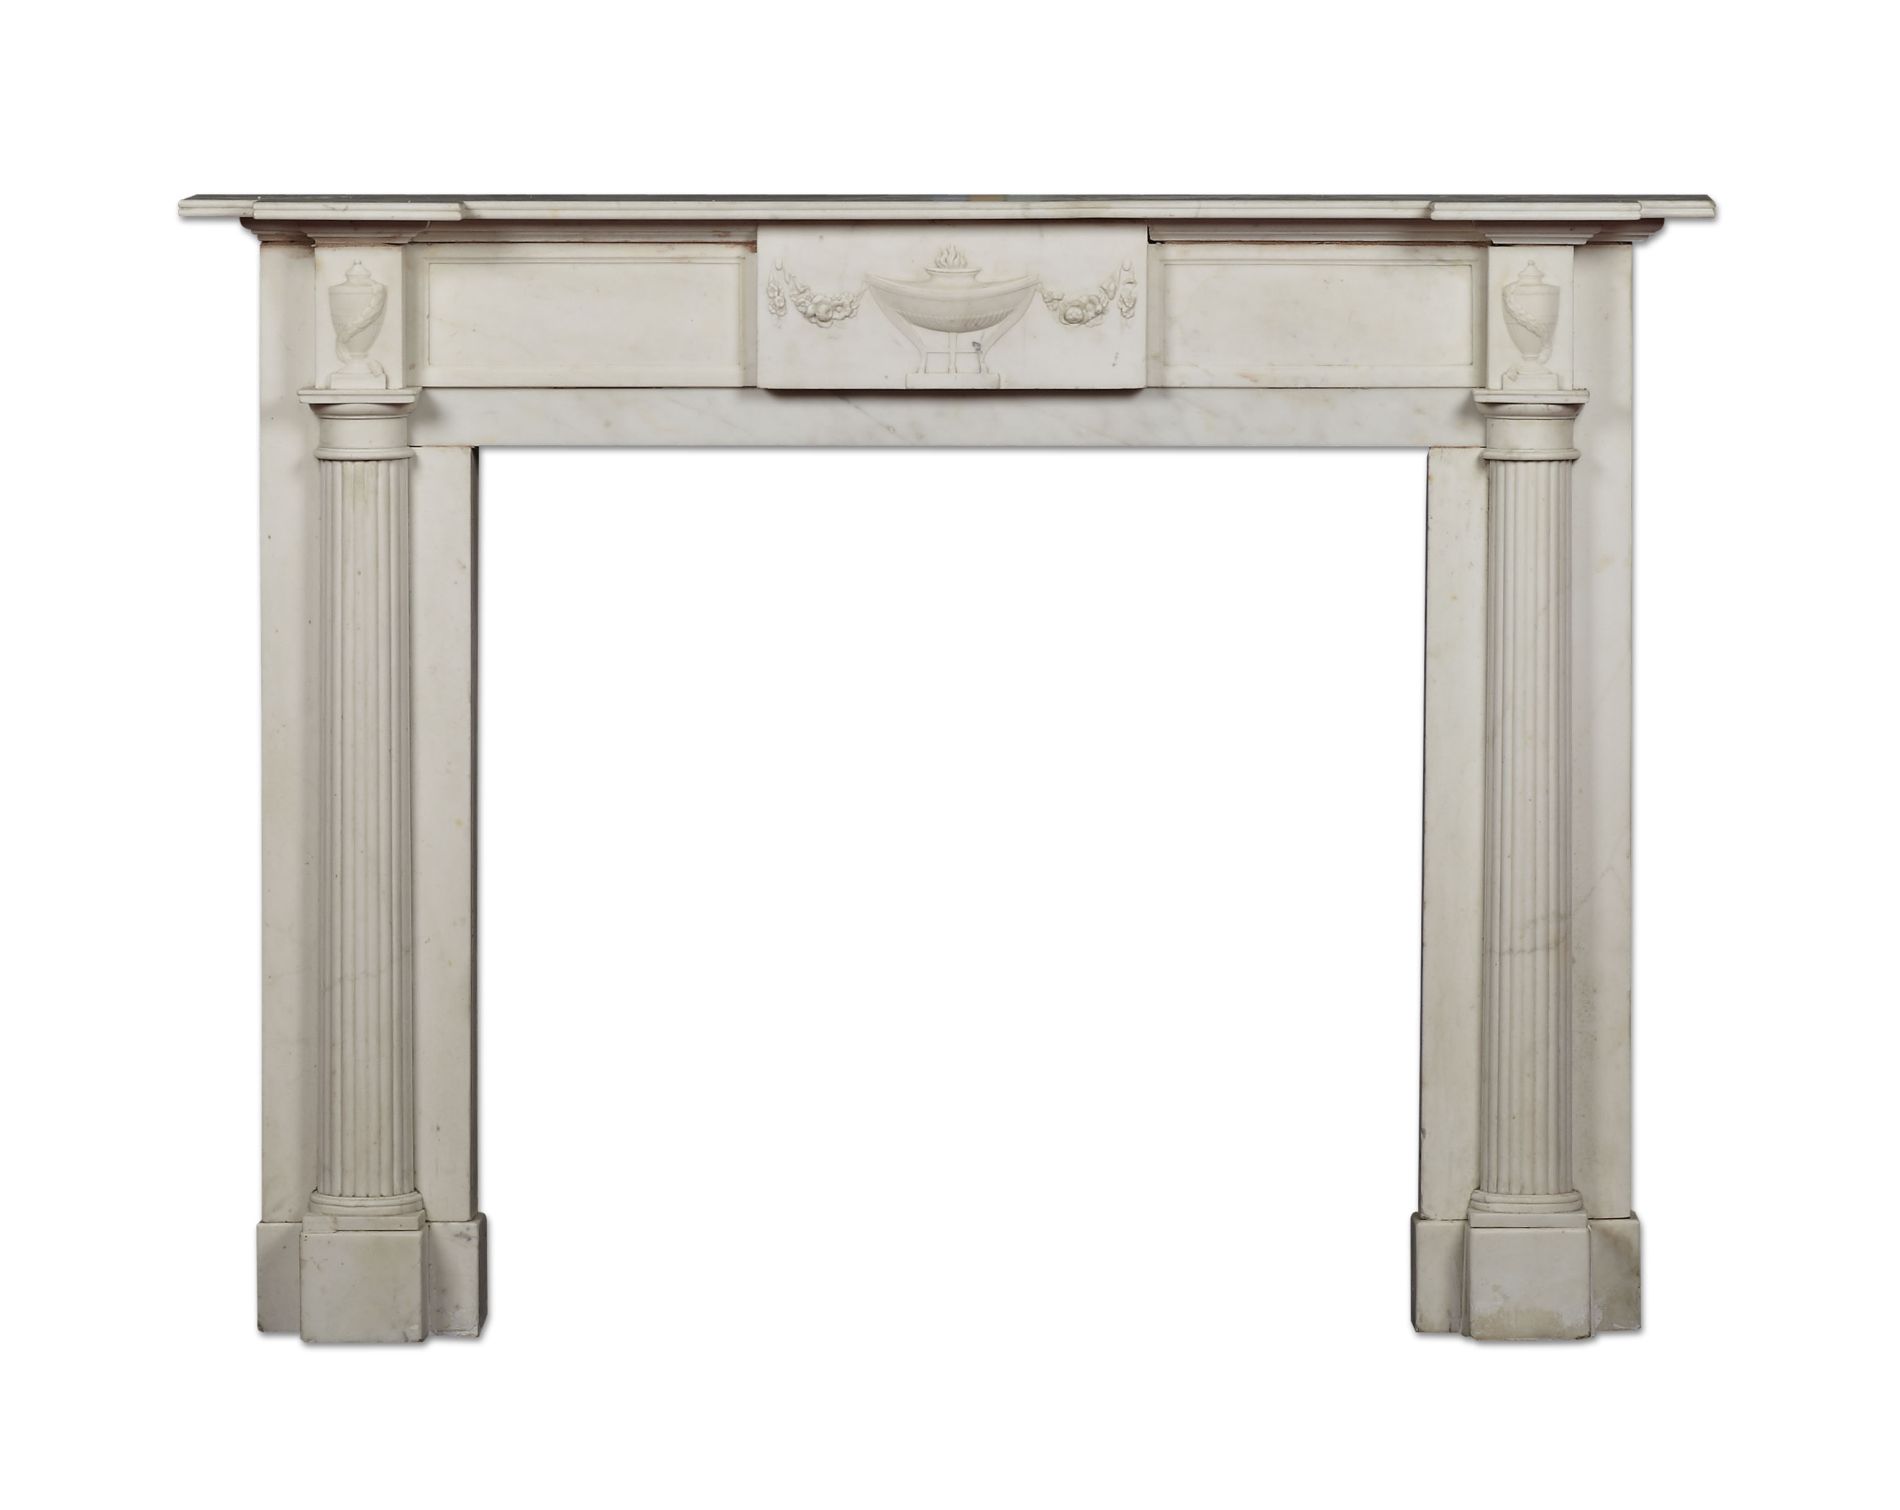 GEORGE III NEOCLASSICAL WHITE MARBLE FIRE SURROUND LATE 18TH CENTURY the inverted breakfront